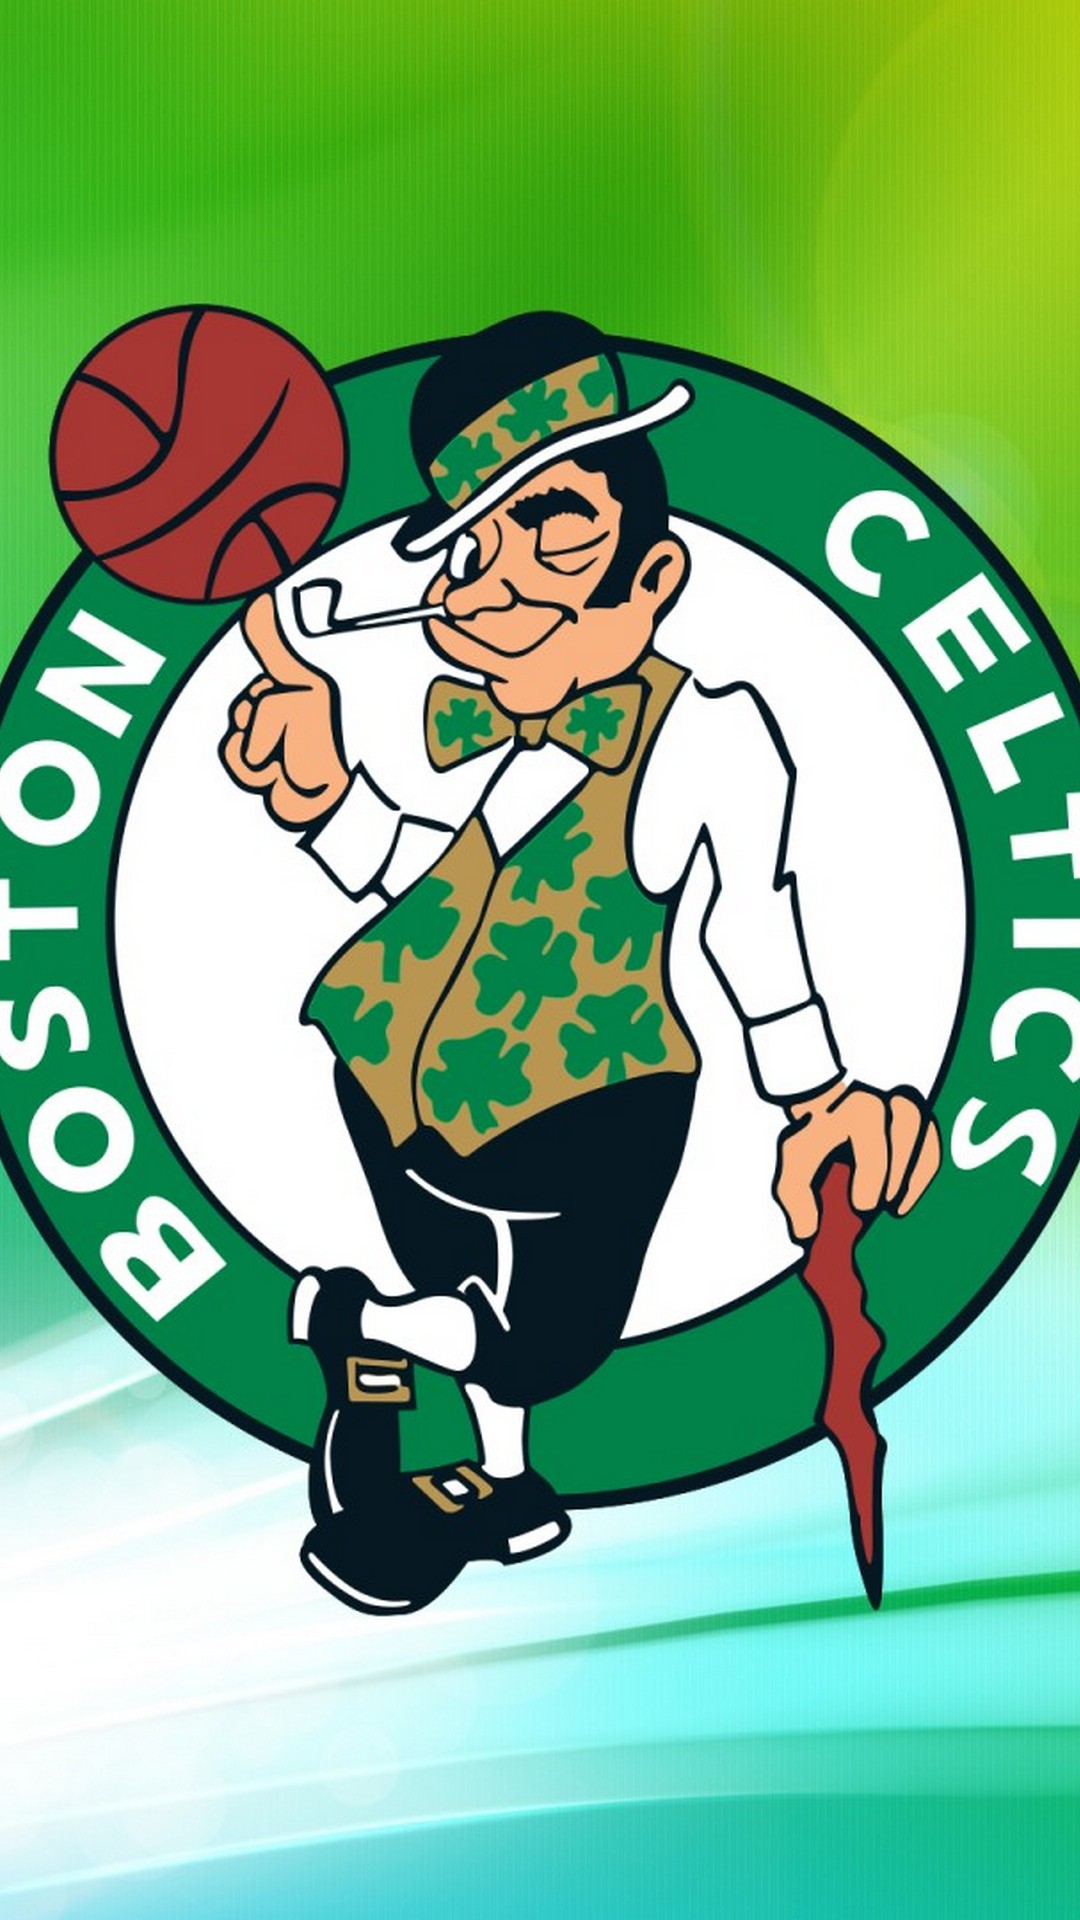 Boston Celtics Wallpaper For iPhone with image resolution 1080x1920 pixel. You can make this wallpaper for your iPhone 5, 6, 7, 8, X backgrounds, Mobile Screensaver, or iPad Lock Screen